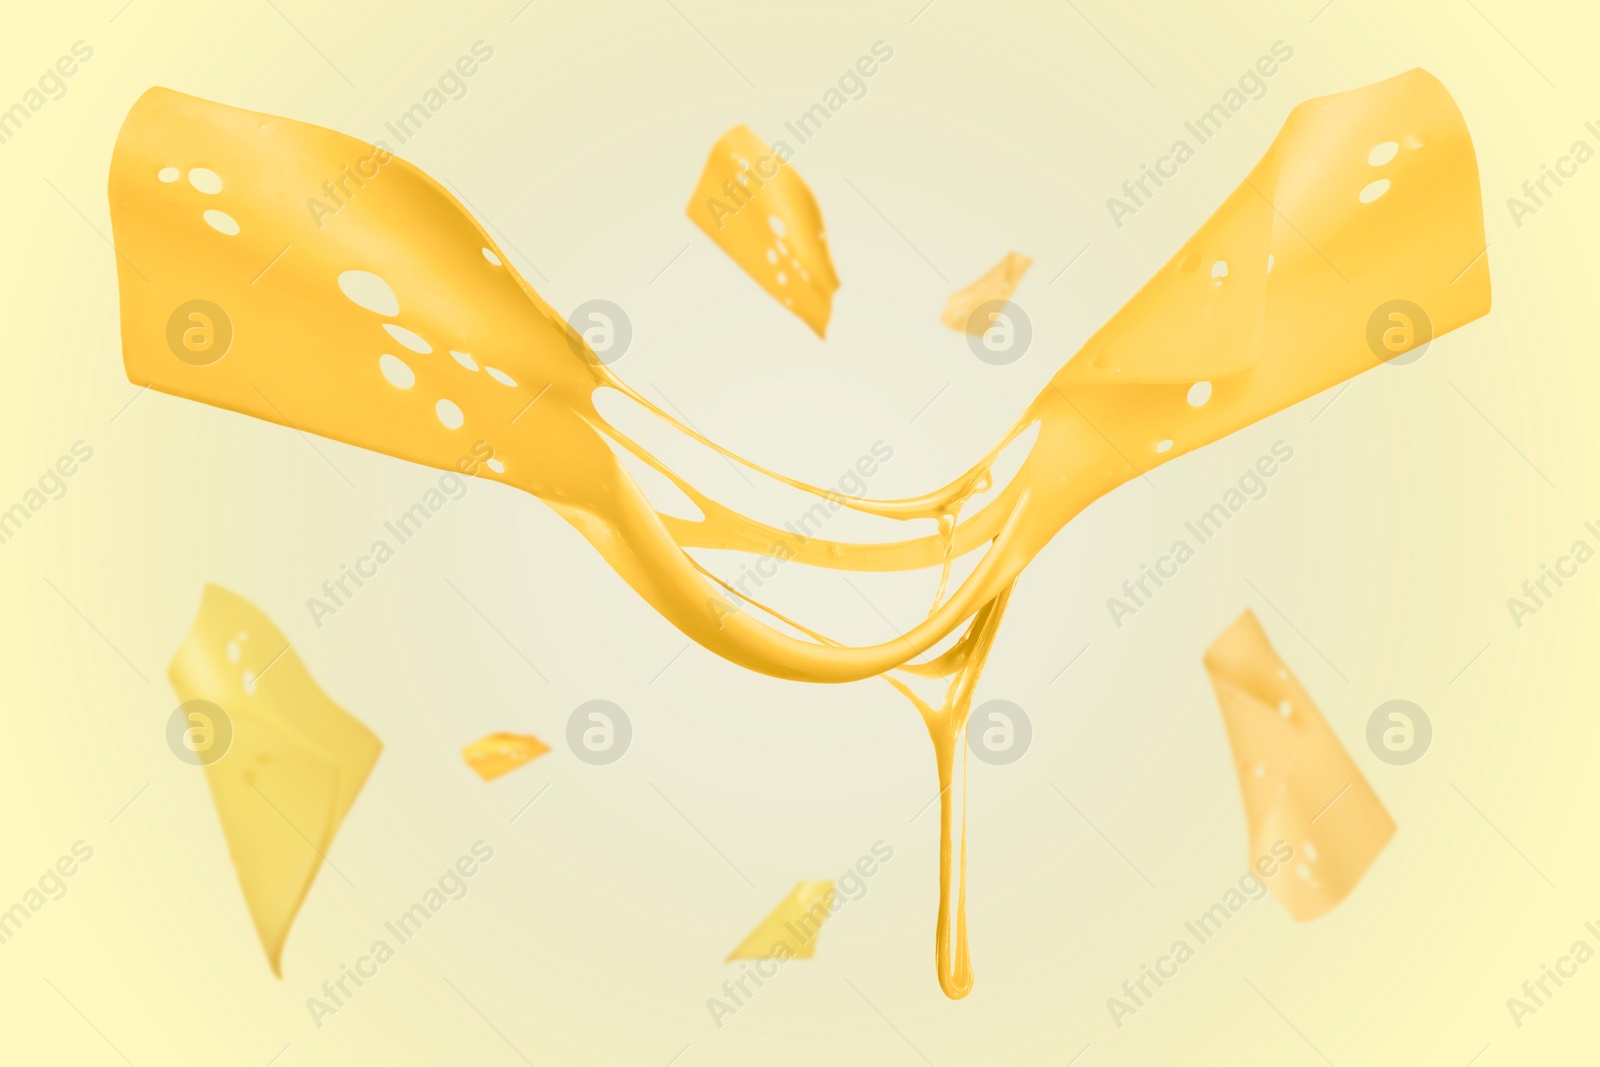 Image of Slicescheese falling on yellow background